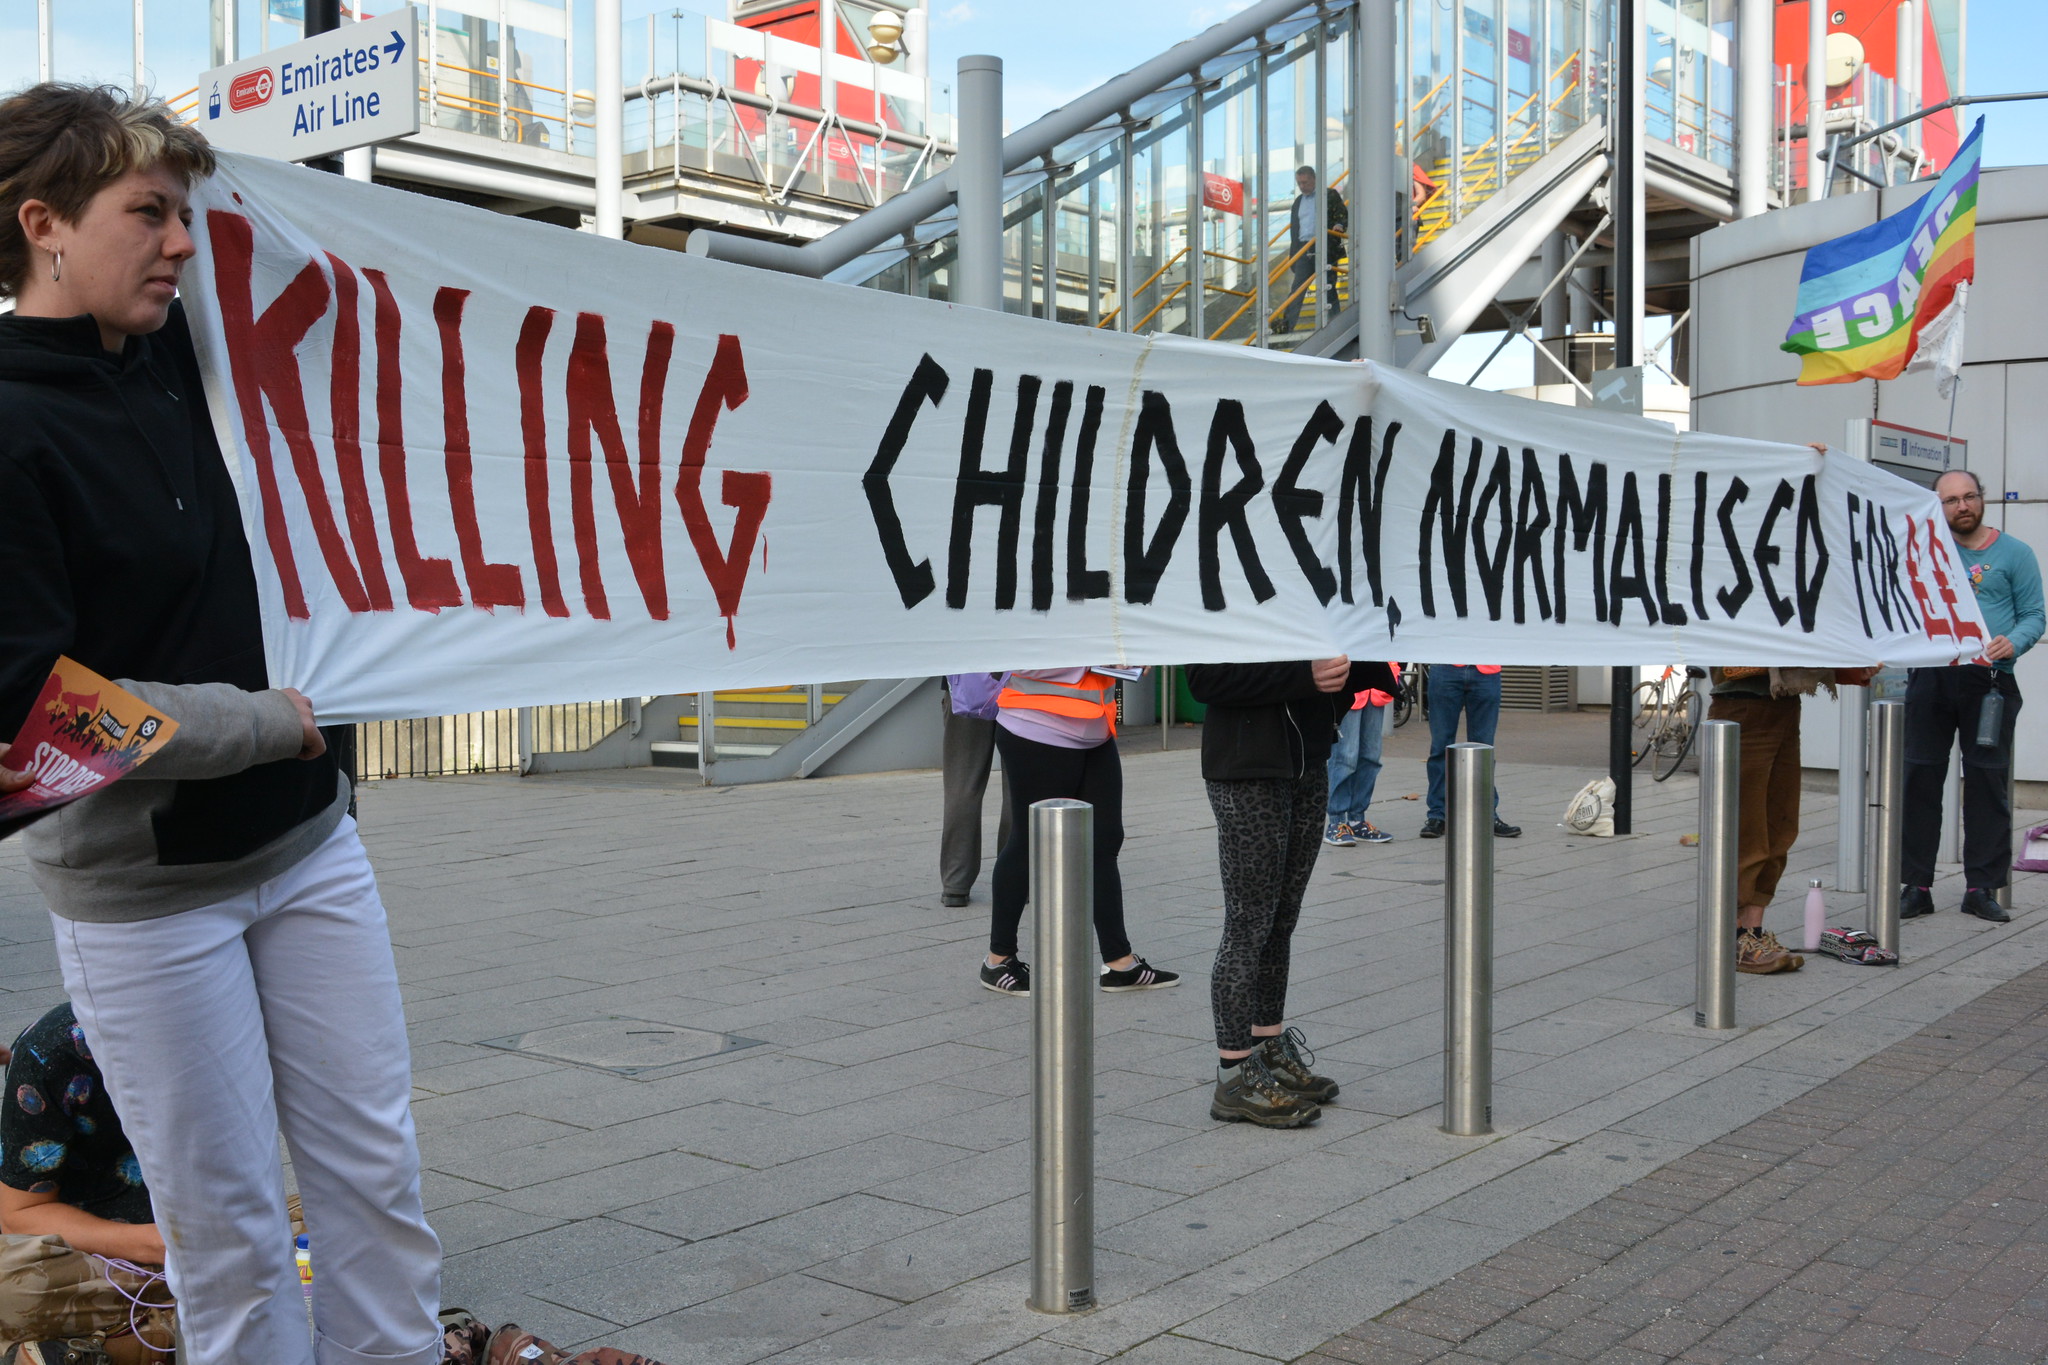 Campaigners at Royal Victoria DLR holding a sign saying Killing Children Normalised for££